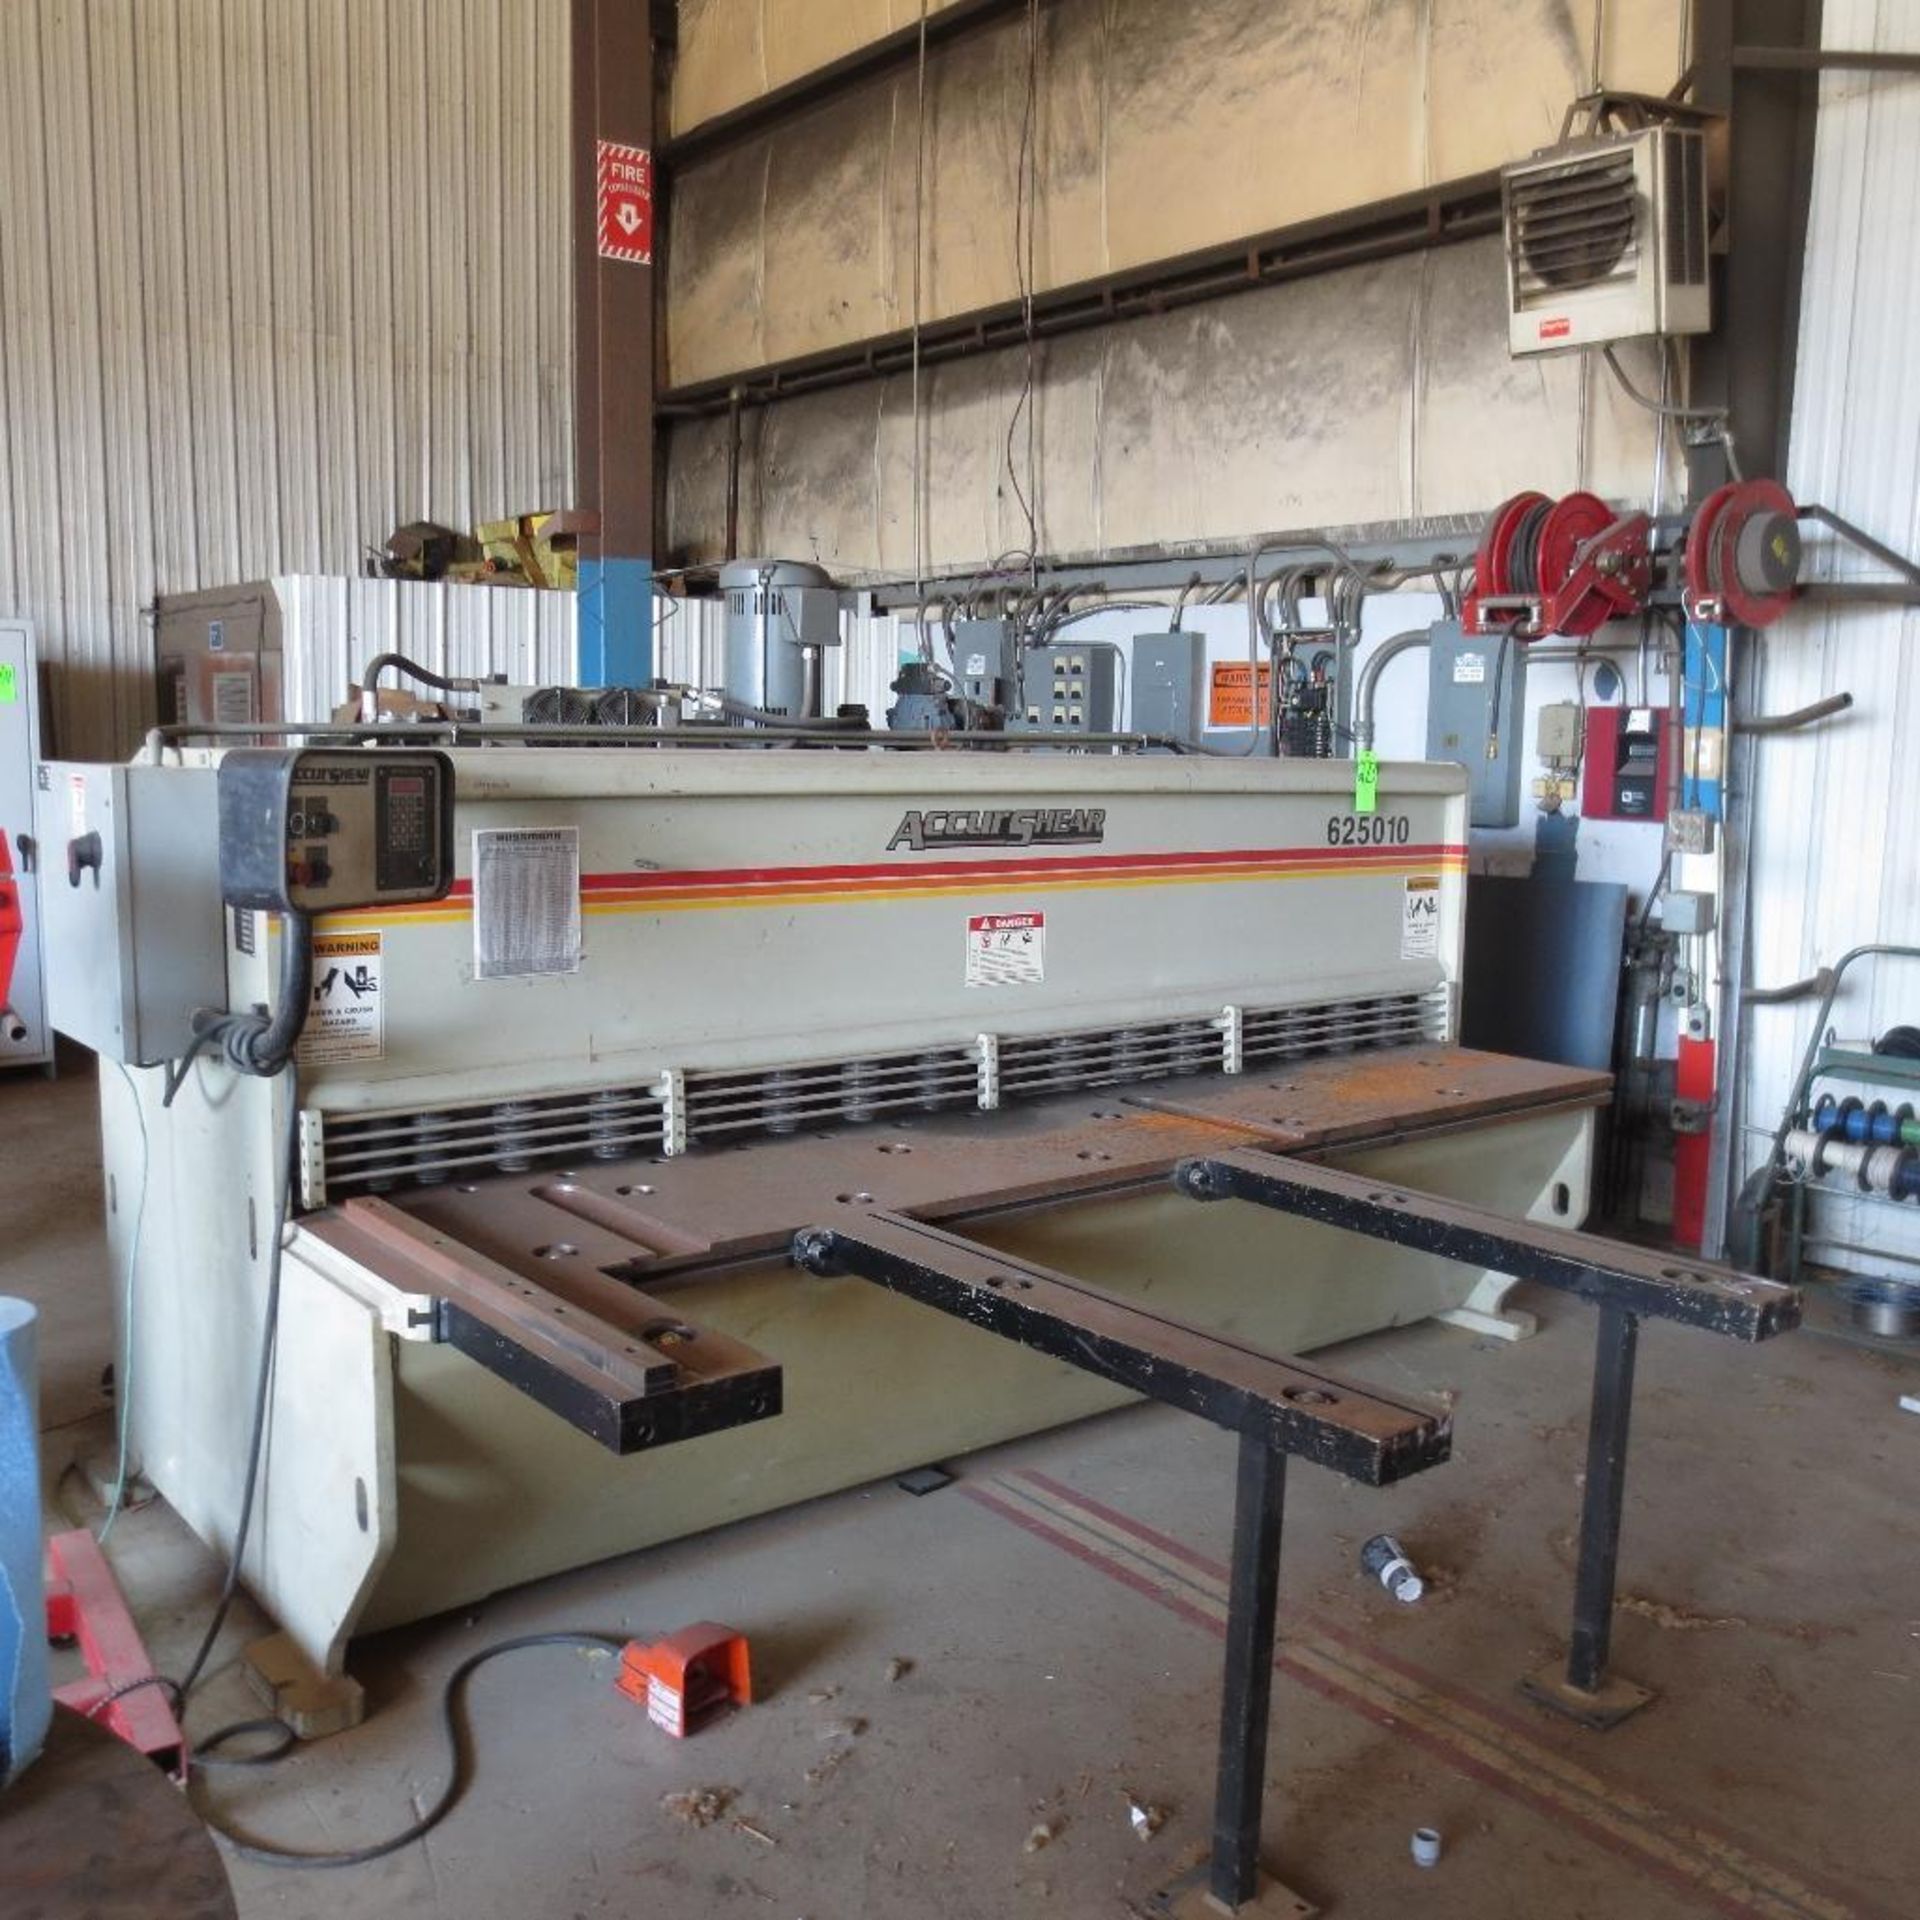 Accur Shear Model 625010 Shear, 2000. 1/4"x10' with Squaring Arm and Front Operated Back Gauge; loca